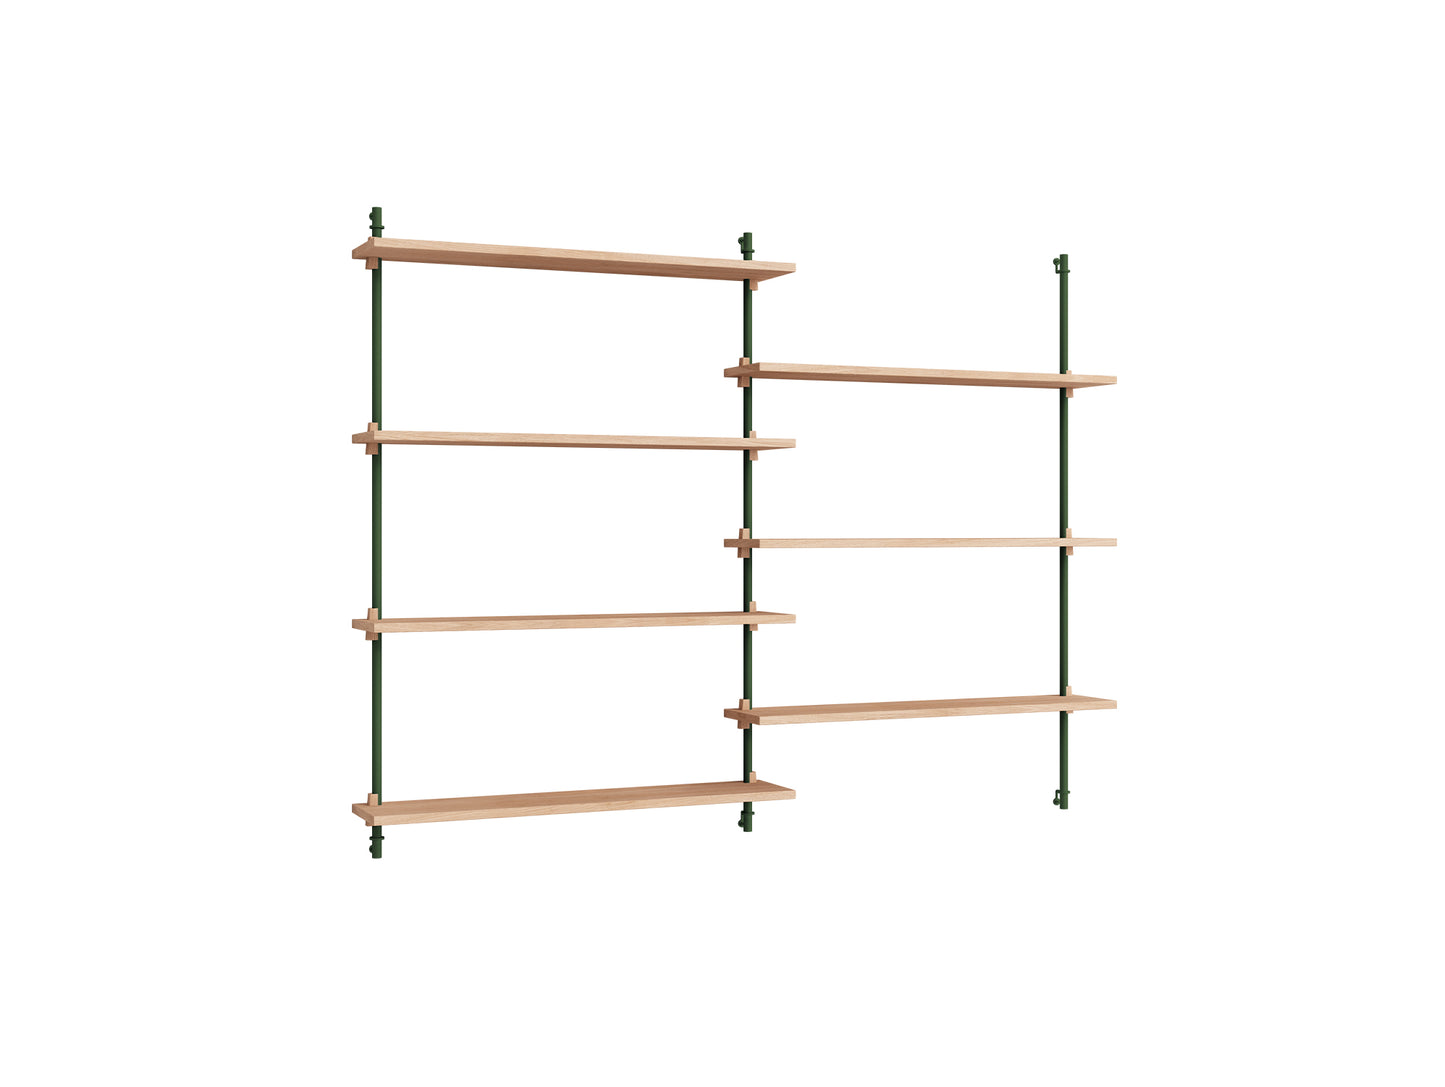 Wall Shelving System Sets (115 cm) by Moebe - WS.115.2 / Pine Green Uprights / Oiled Oak